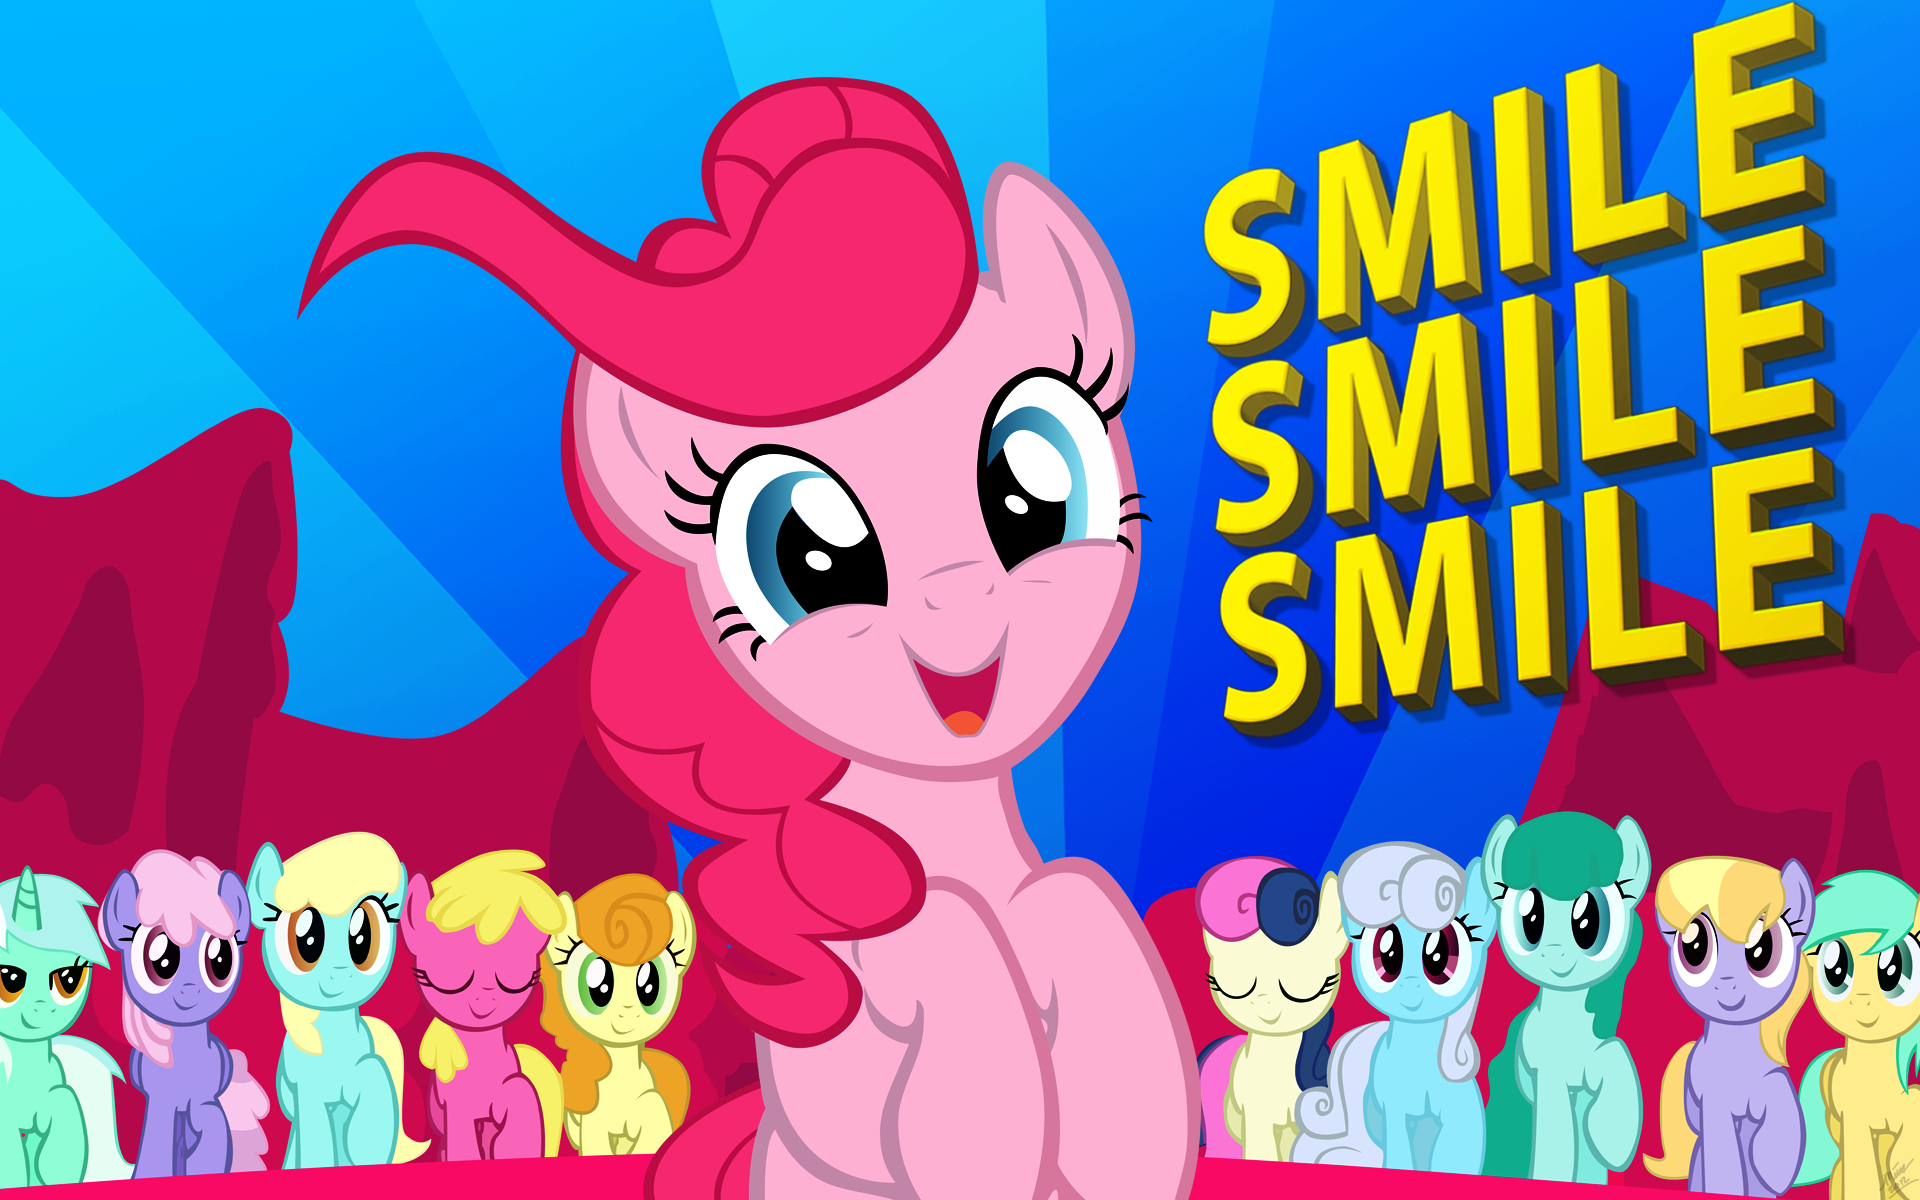 SMILE! Wallpaper by ExtrahoVinco